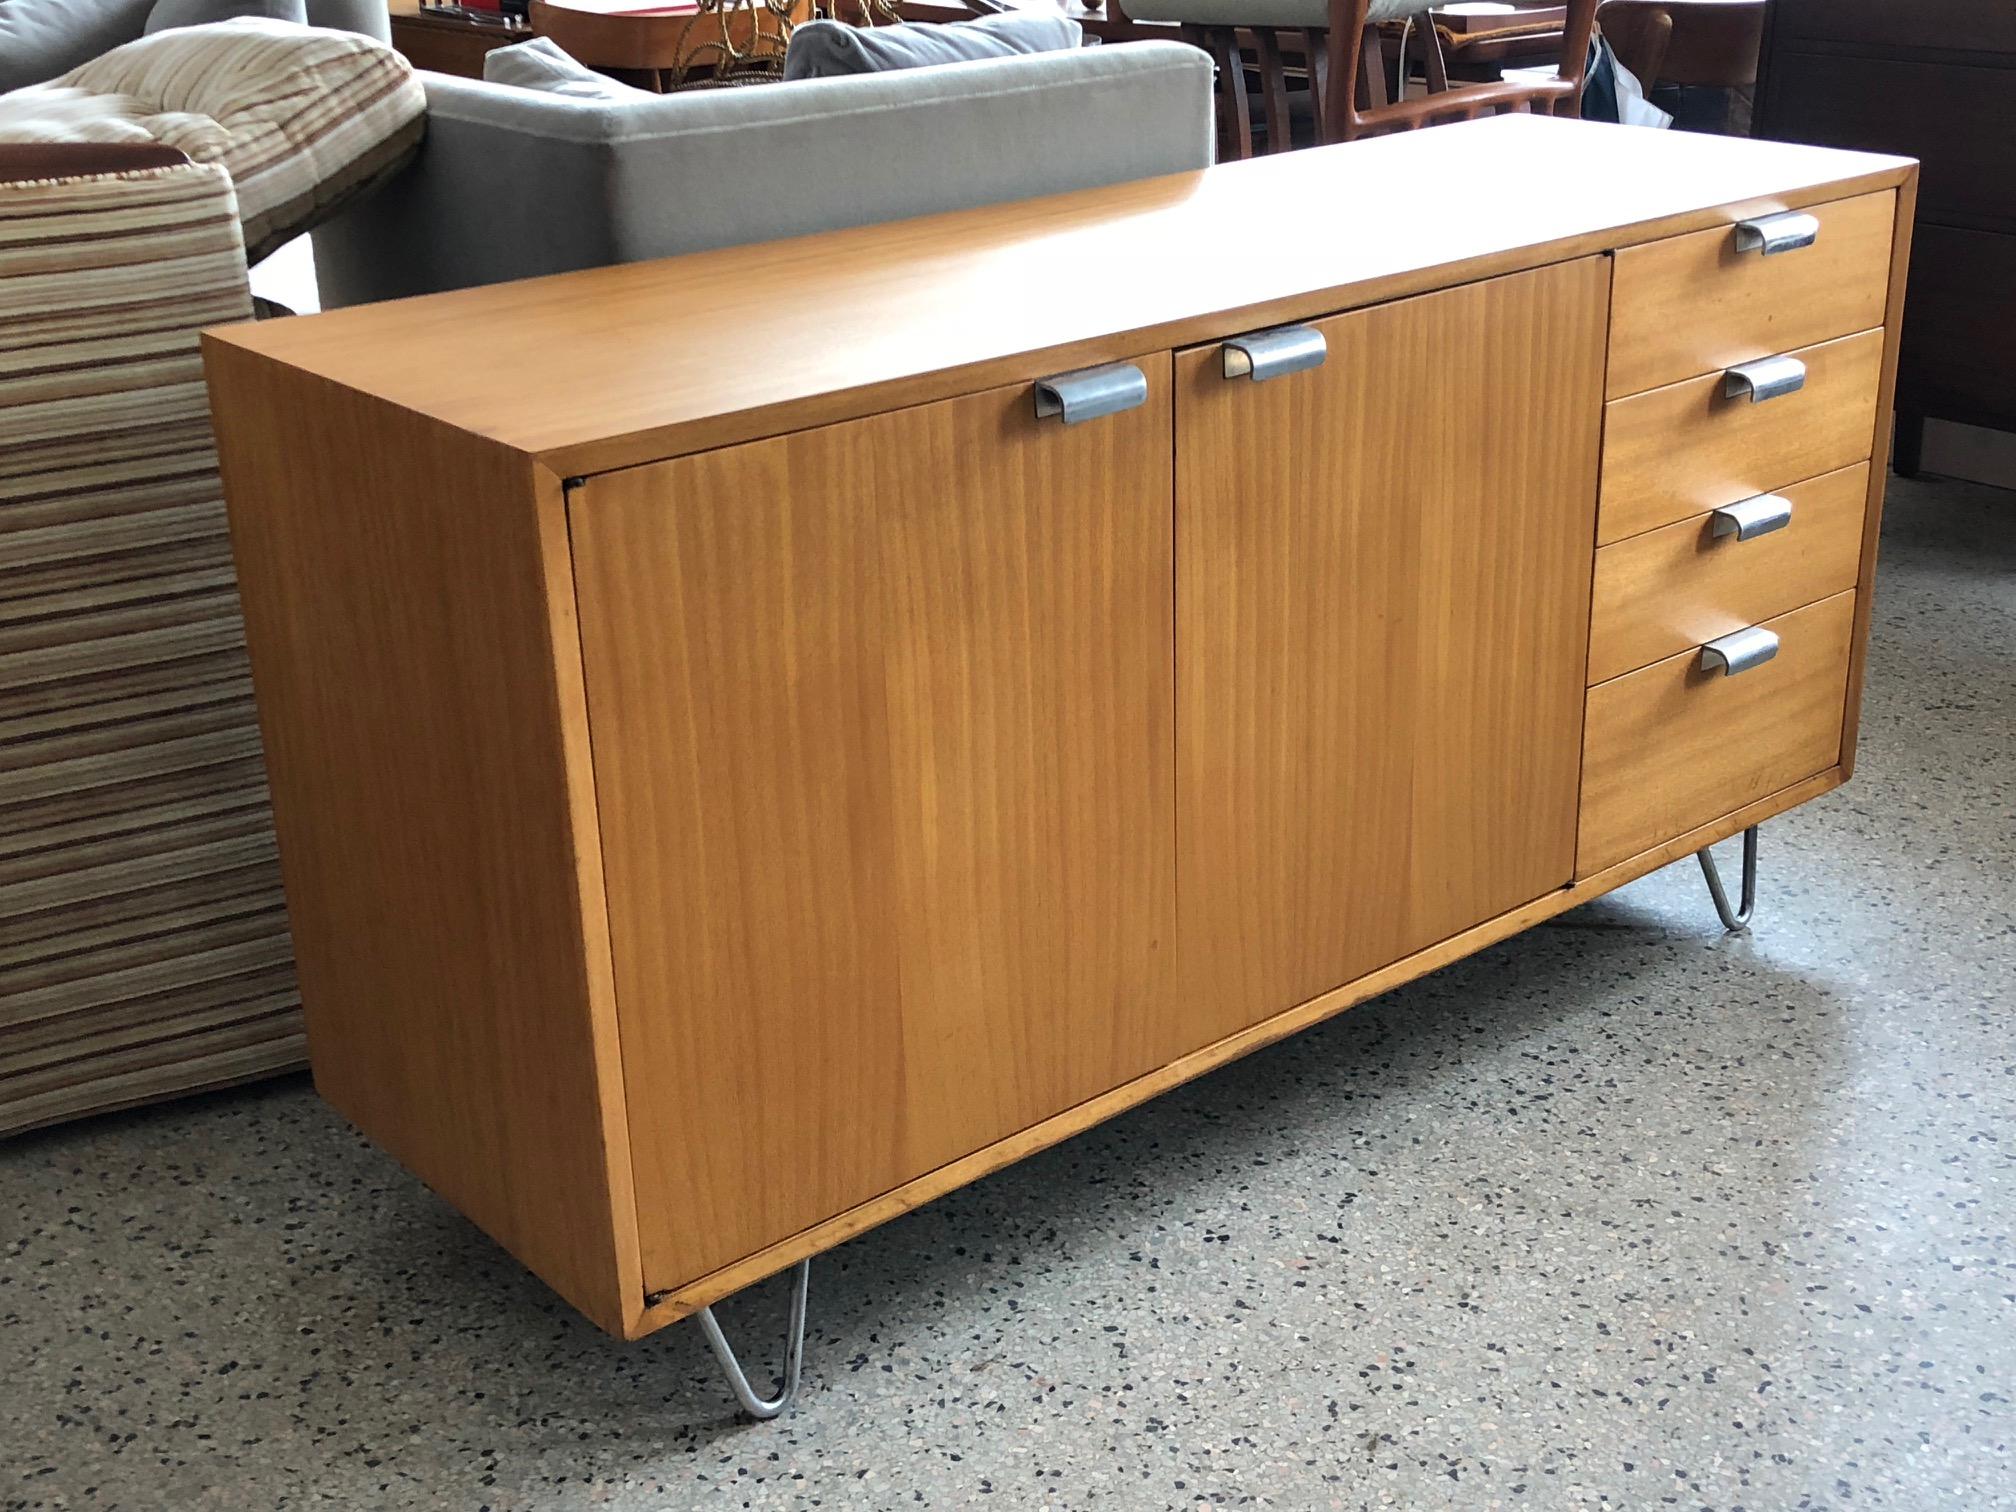 A great George Nelson credenza for Herman Miller, circa 1950s. Primavera with original hardware and rare harpin legs. Completely restored, hardware polished.